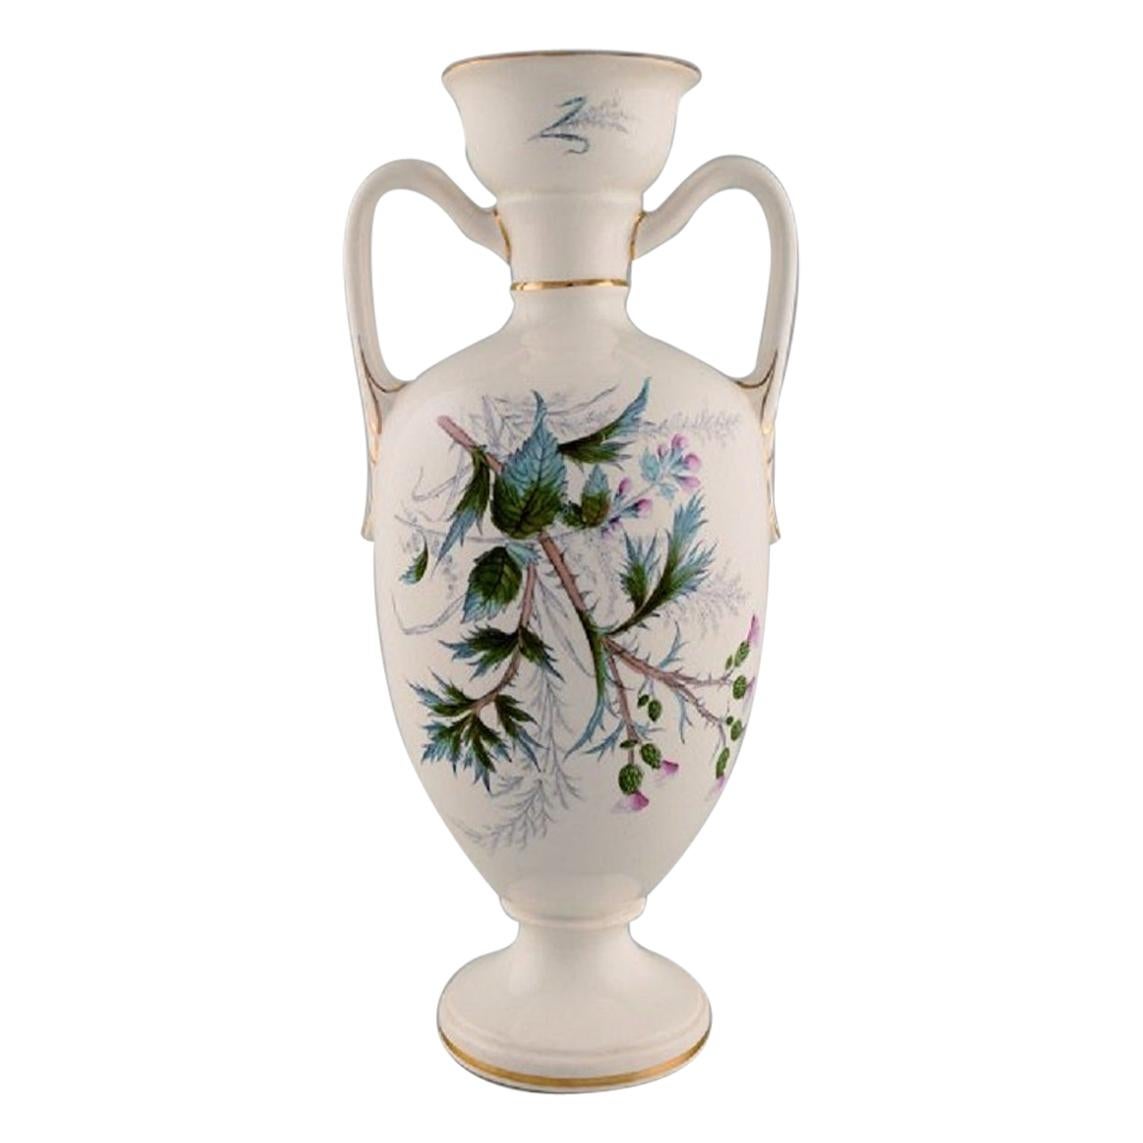 Early Rörstrand Vase in Faience with Floral Motifs, circa 1920